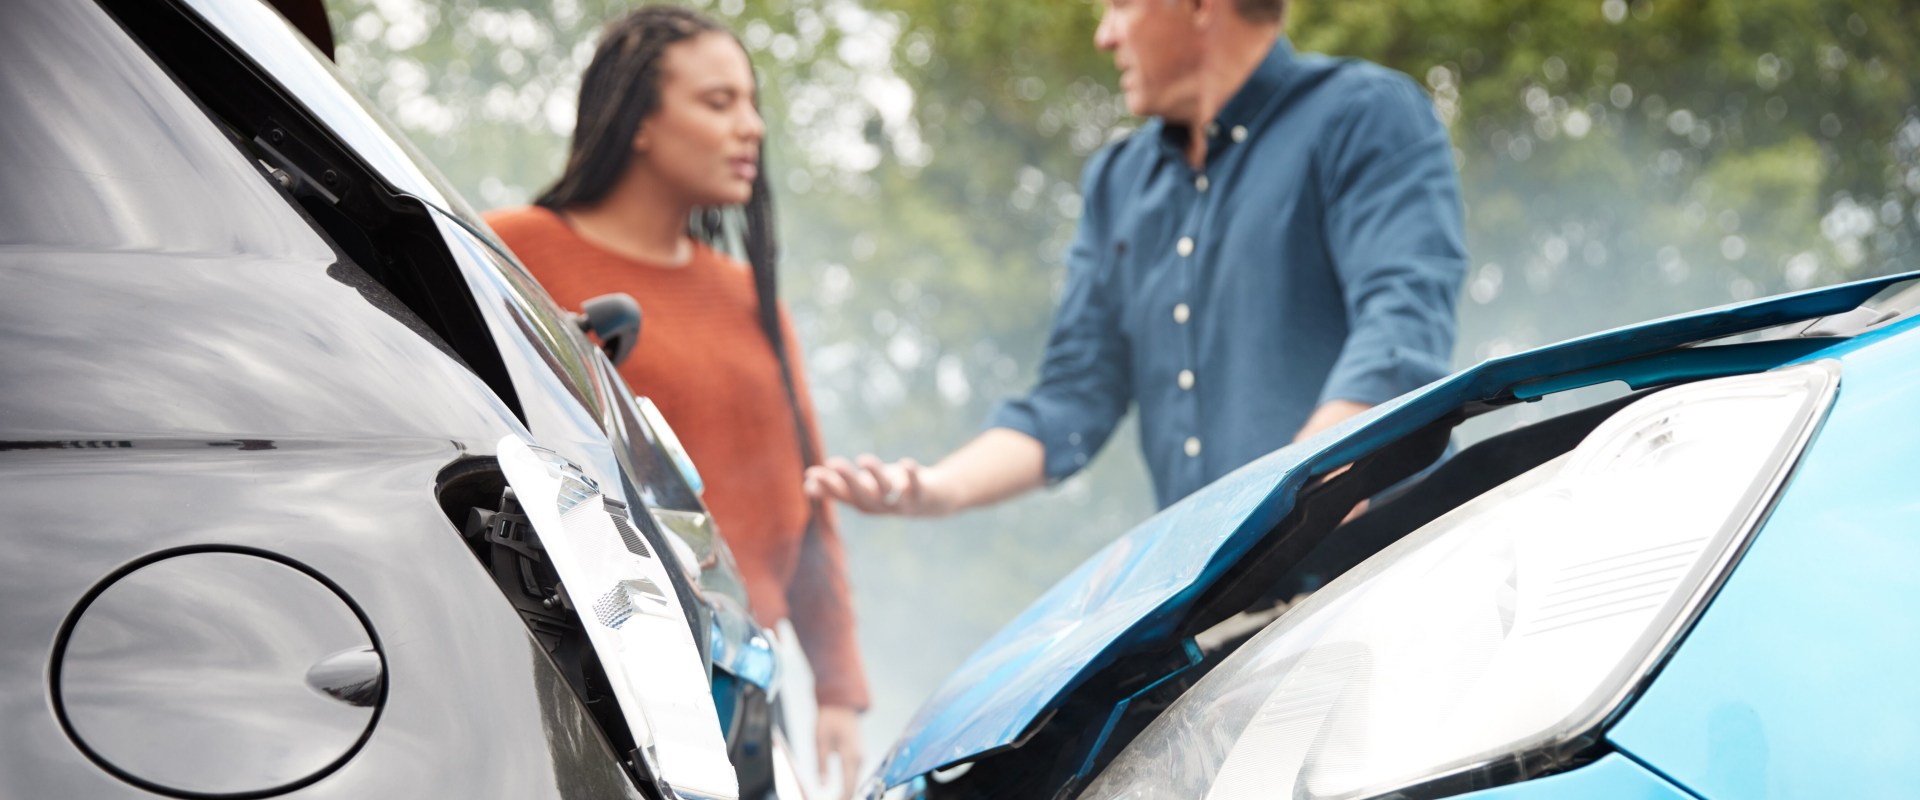 Why You Should Consider Hiring a Personal Injury Lawyer After a Car Crash